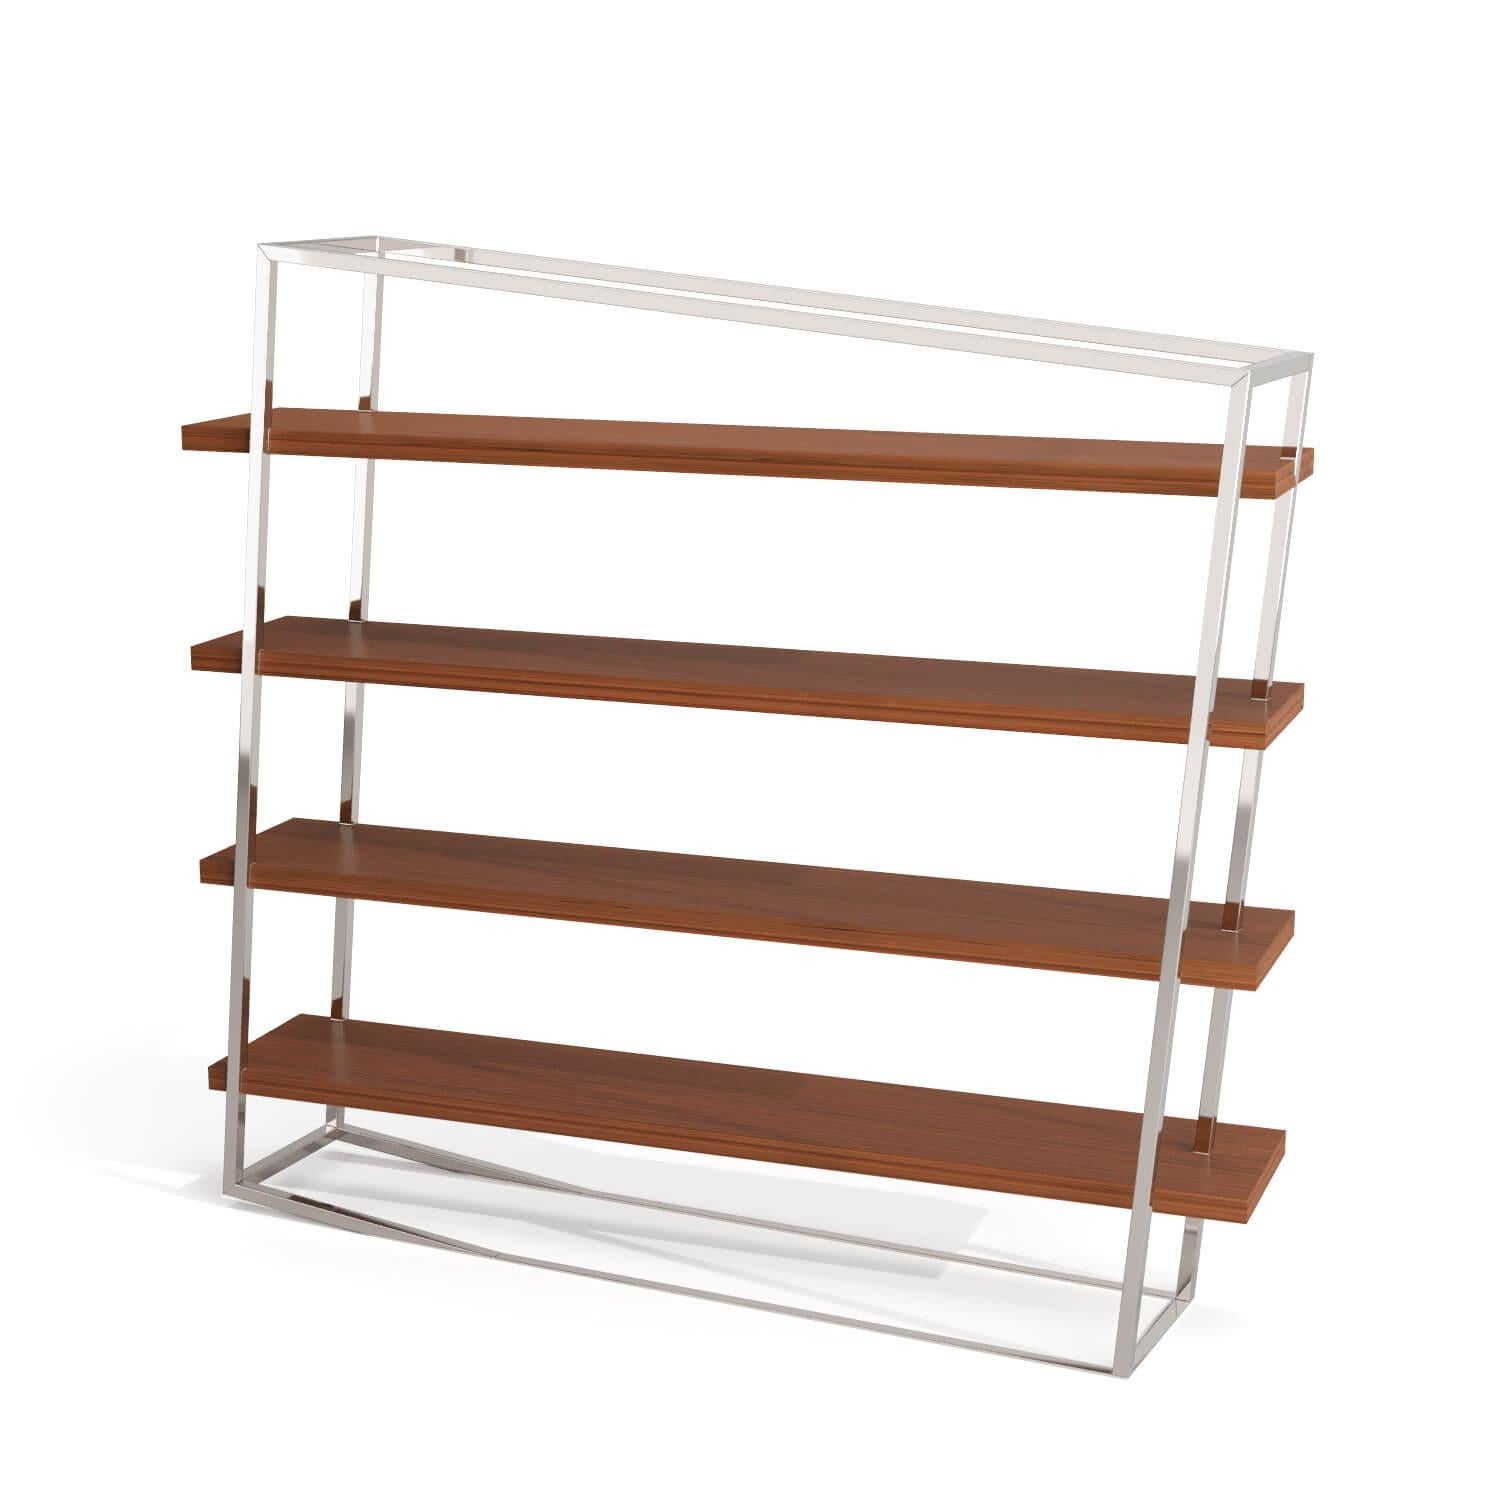 Portuguese Modern Large Accent Bookcase with Shelves Tineo Wood and Brushed Stainless Steel For Sale